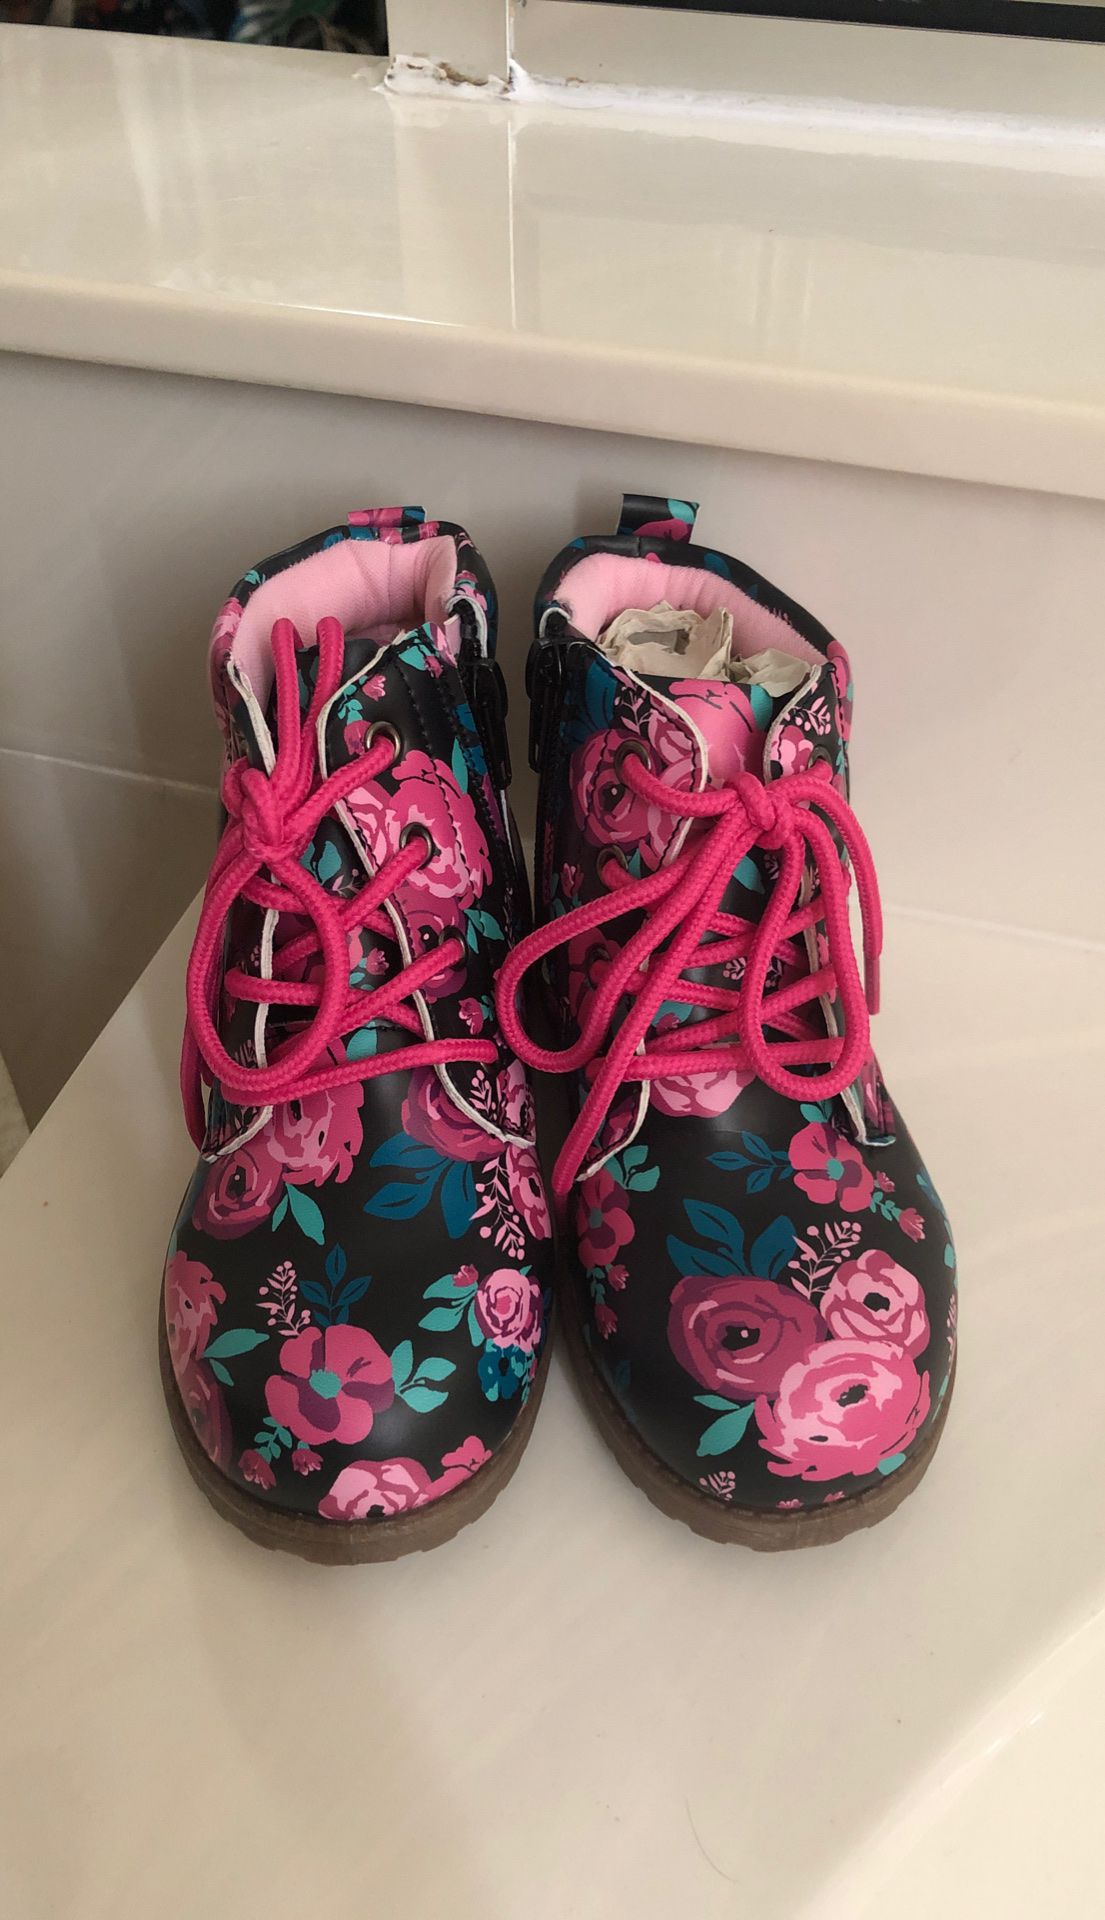 Toddler boots brand new